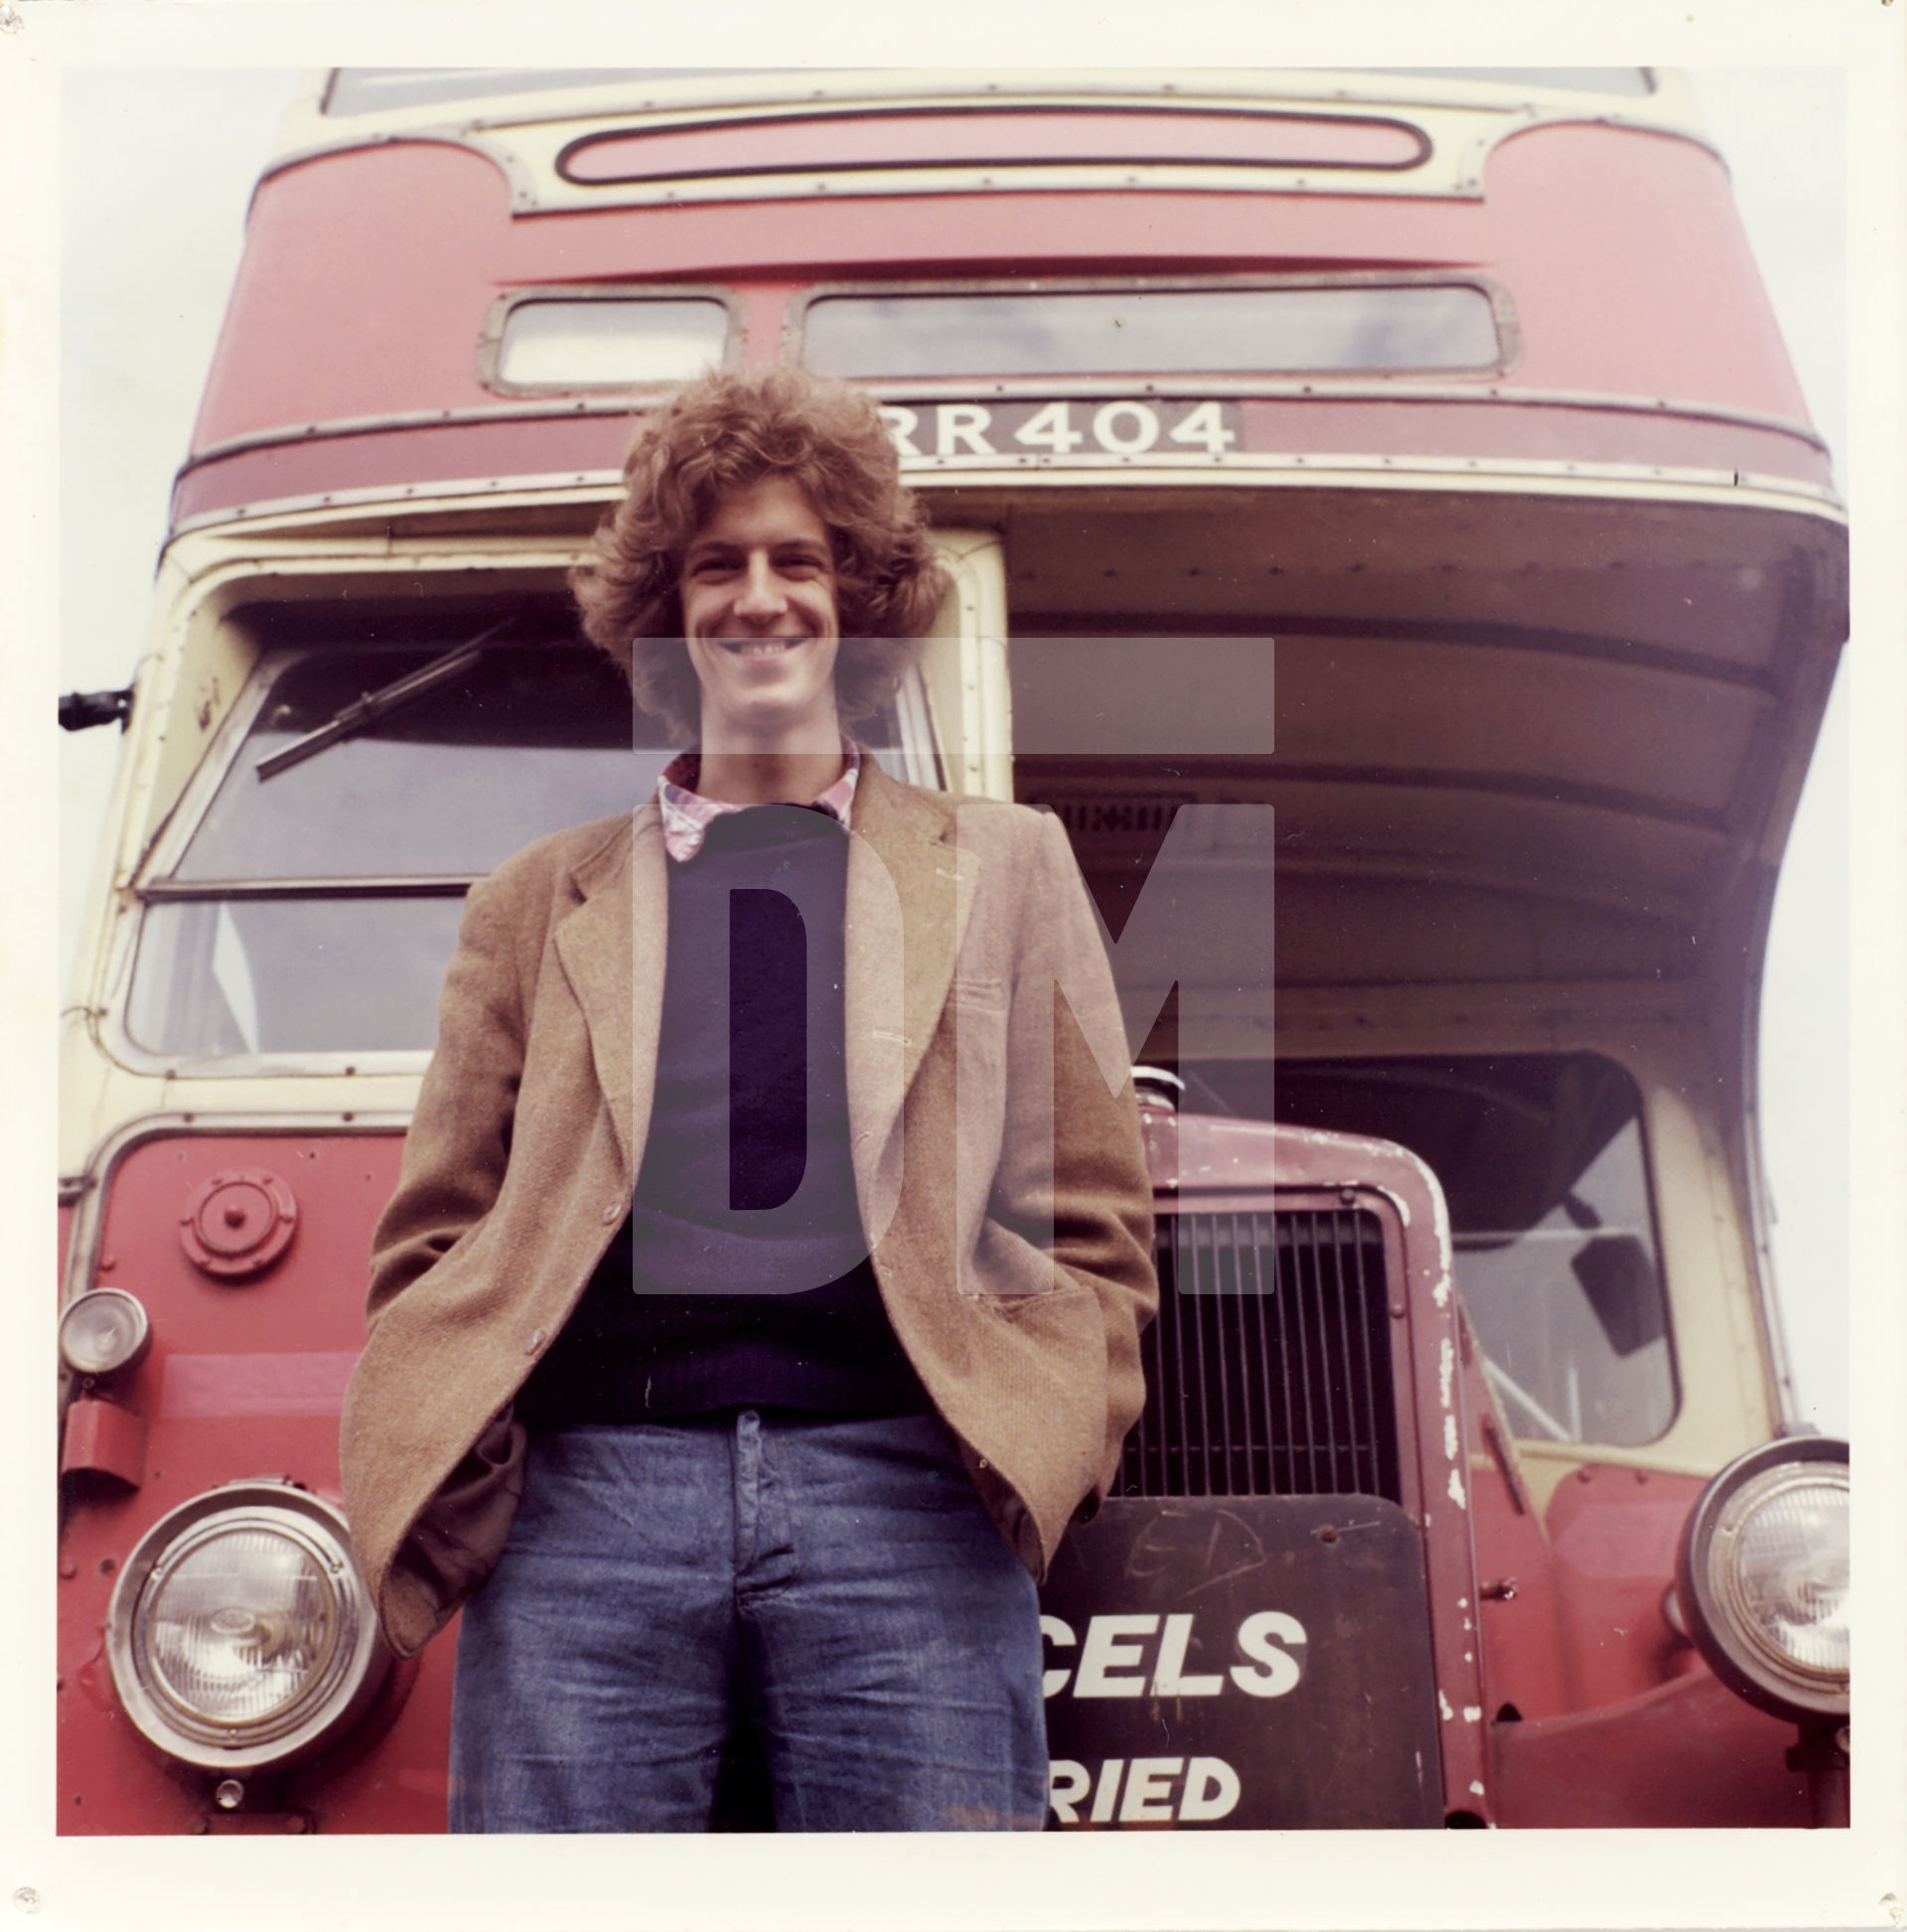 Picture by Peter Broughton shows Daniel Meadows in Barton Transport’s yard at Chilwell, Nottingham, on the day he purchased JRR 404. July 1973 by Daniel Meadows